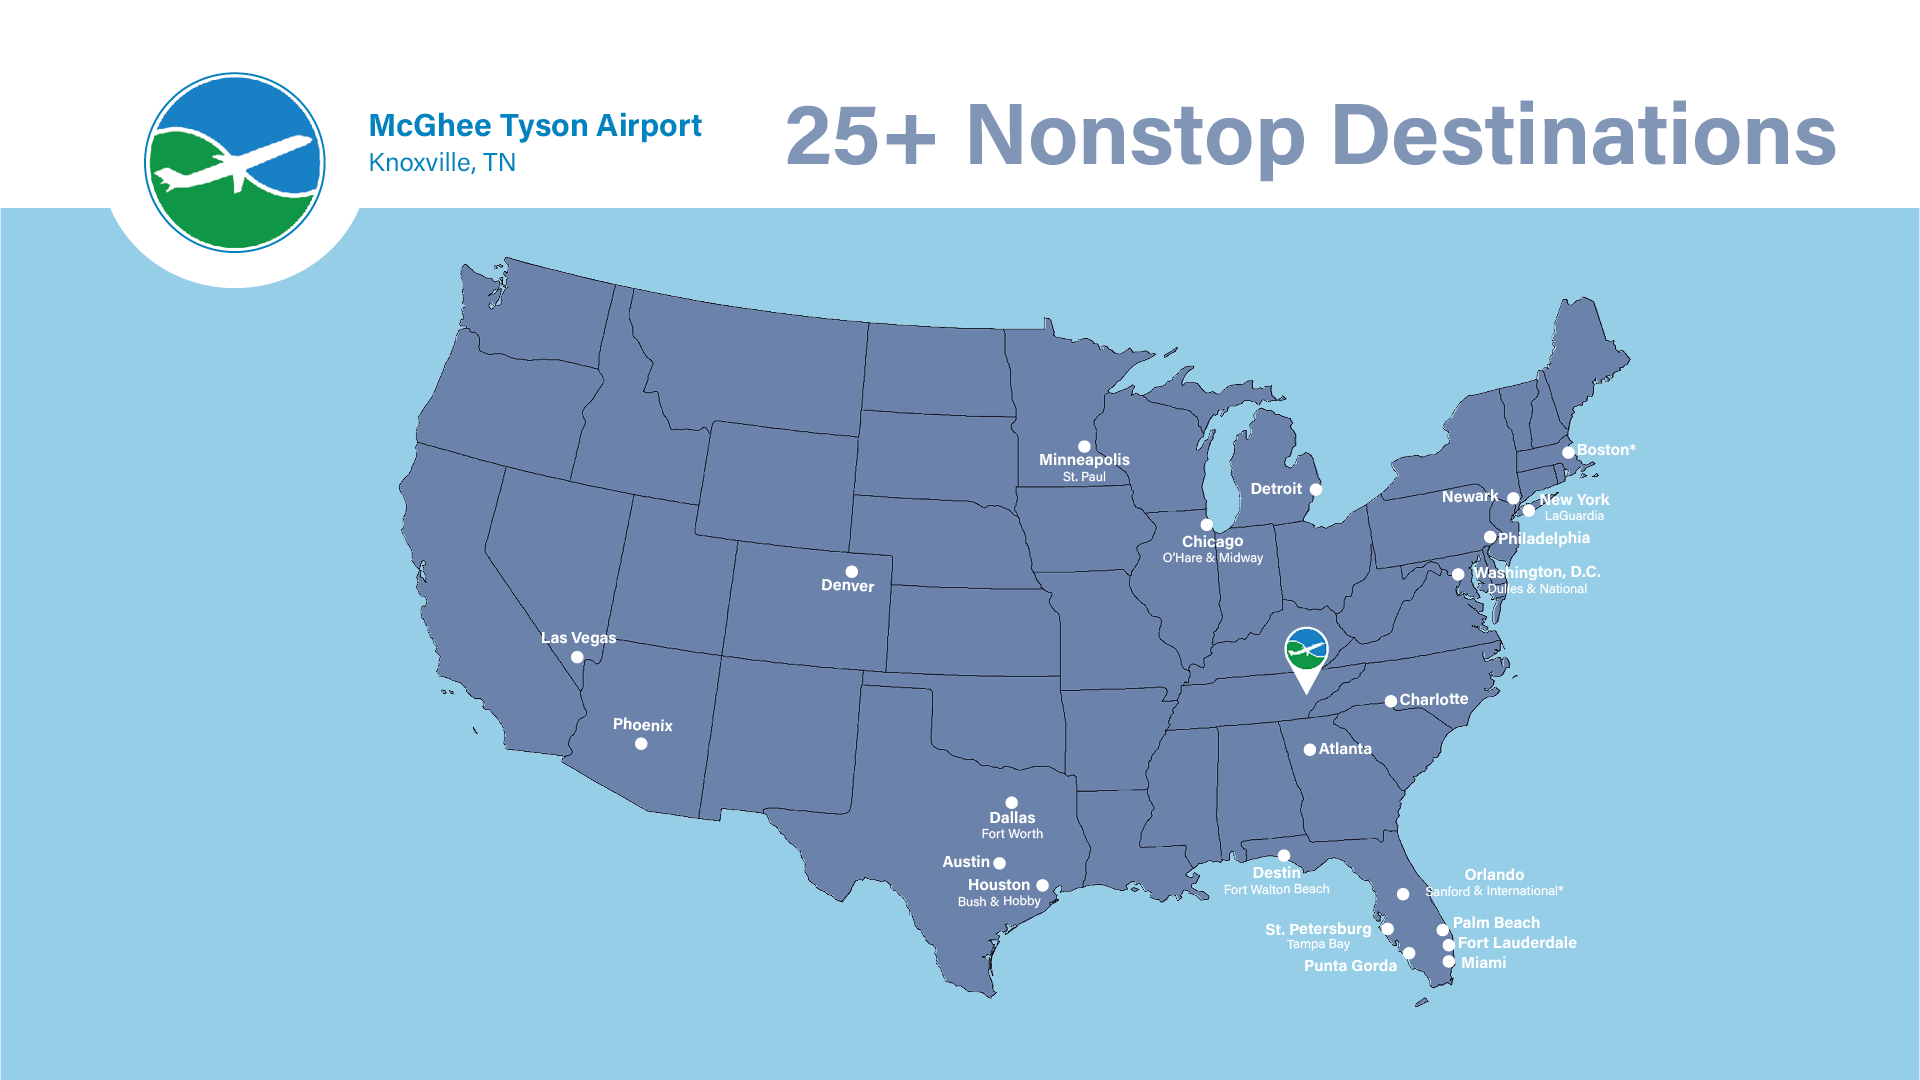 Flights To and From Knoxville, TN at McGhee Tyson Airport